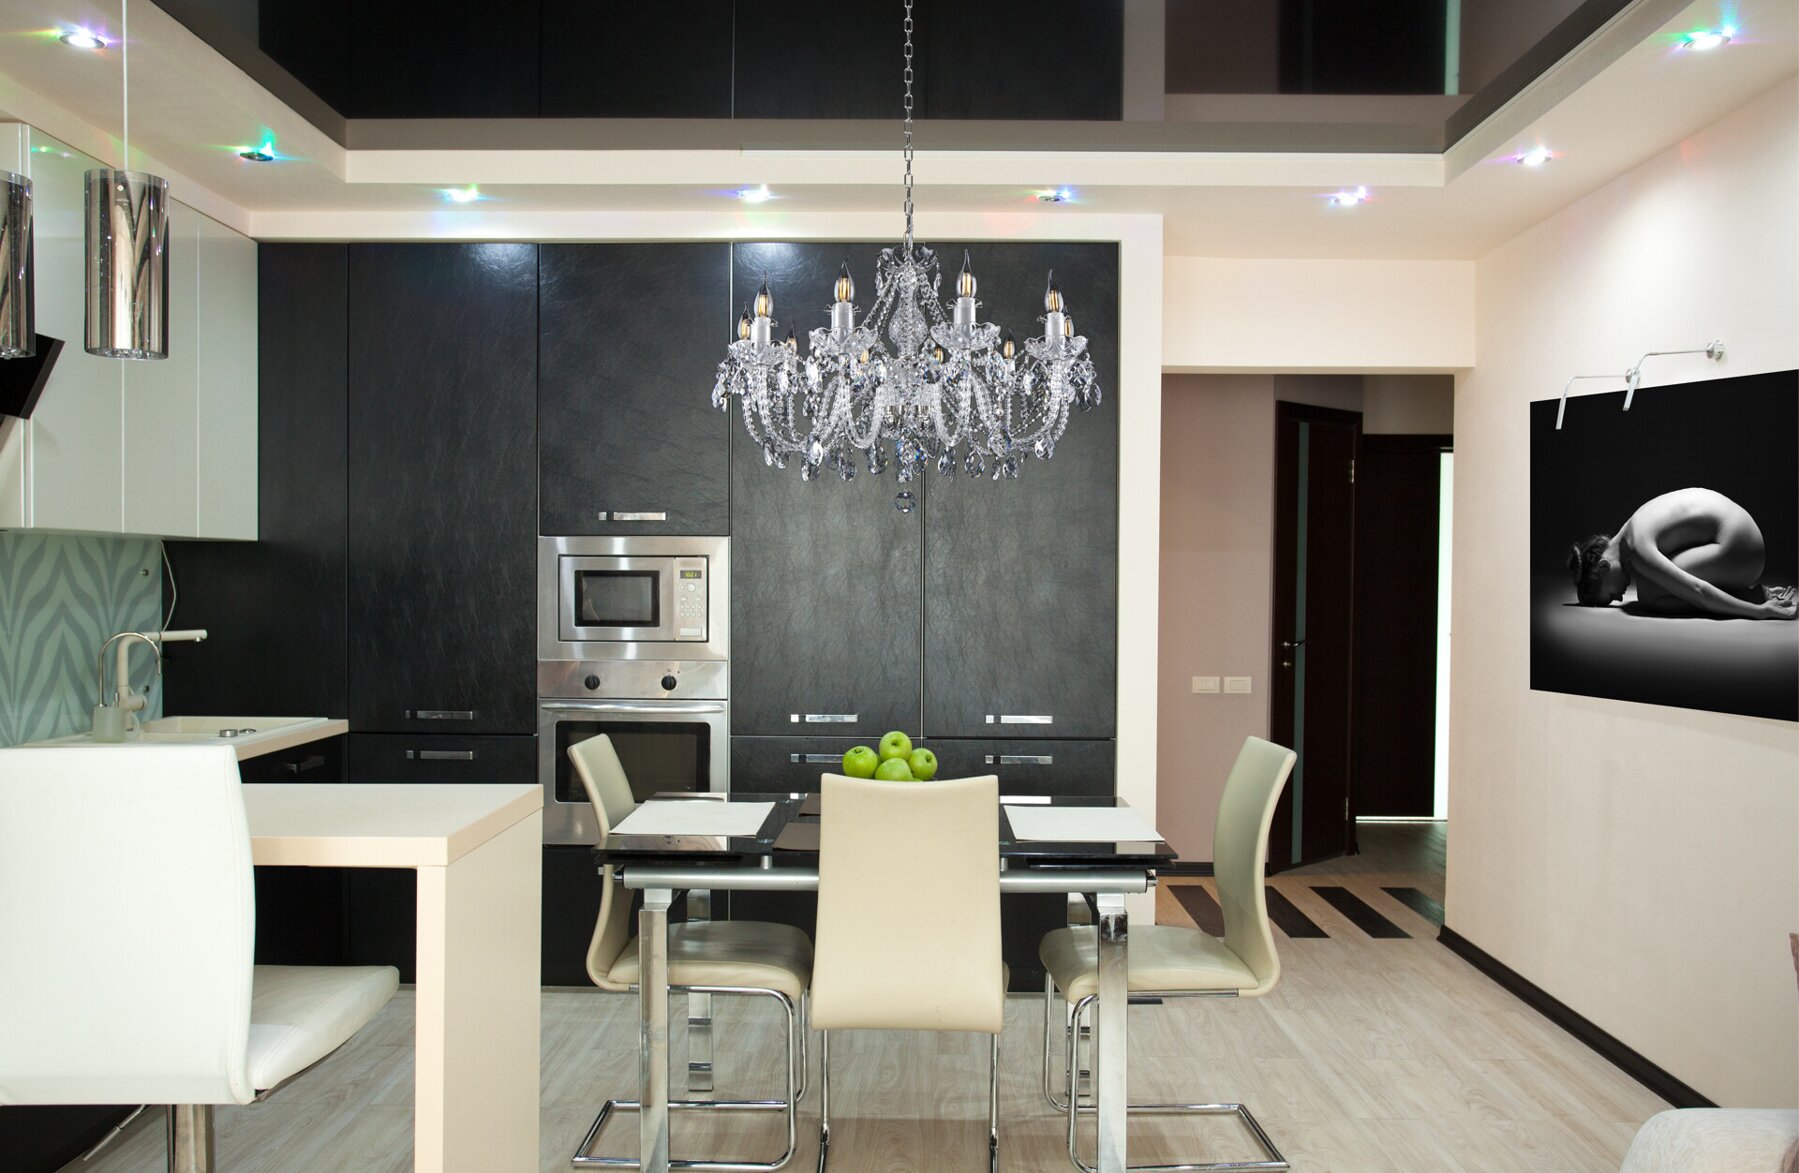 Kitchen and dining room crystal chandelier in modern style EL1001002PB